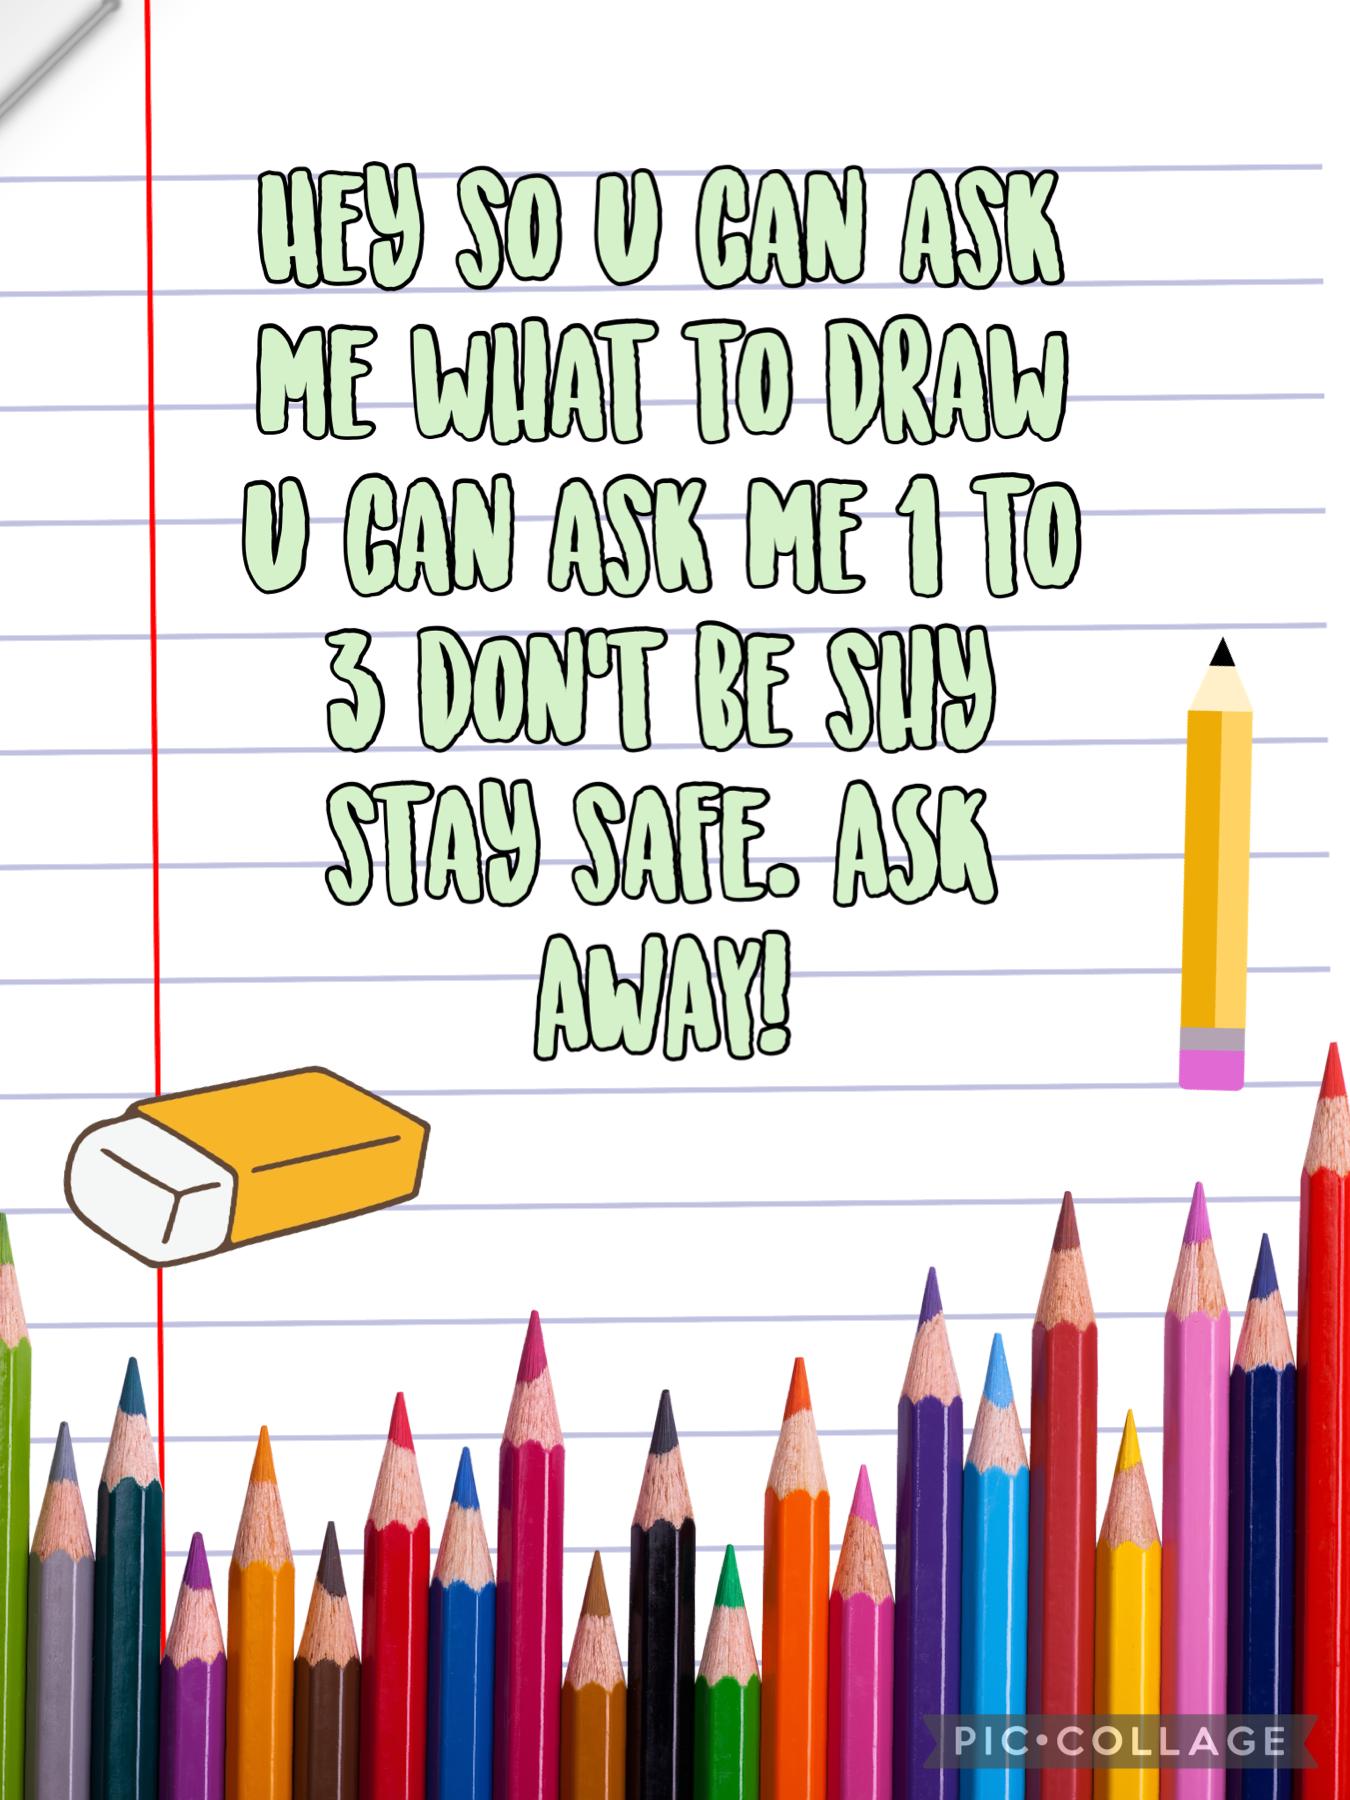 What shall I draw